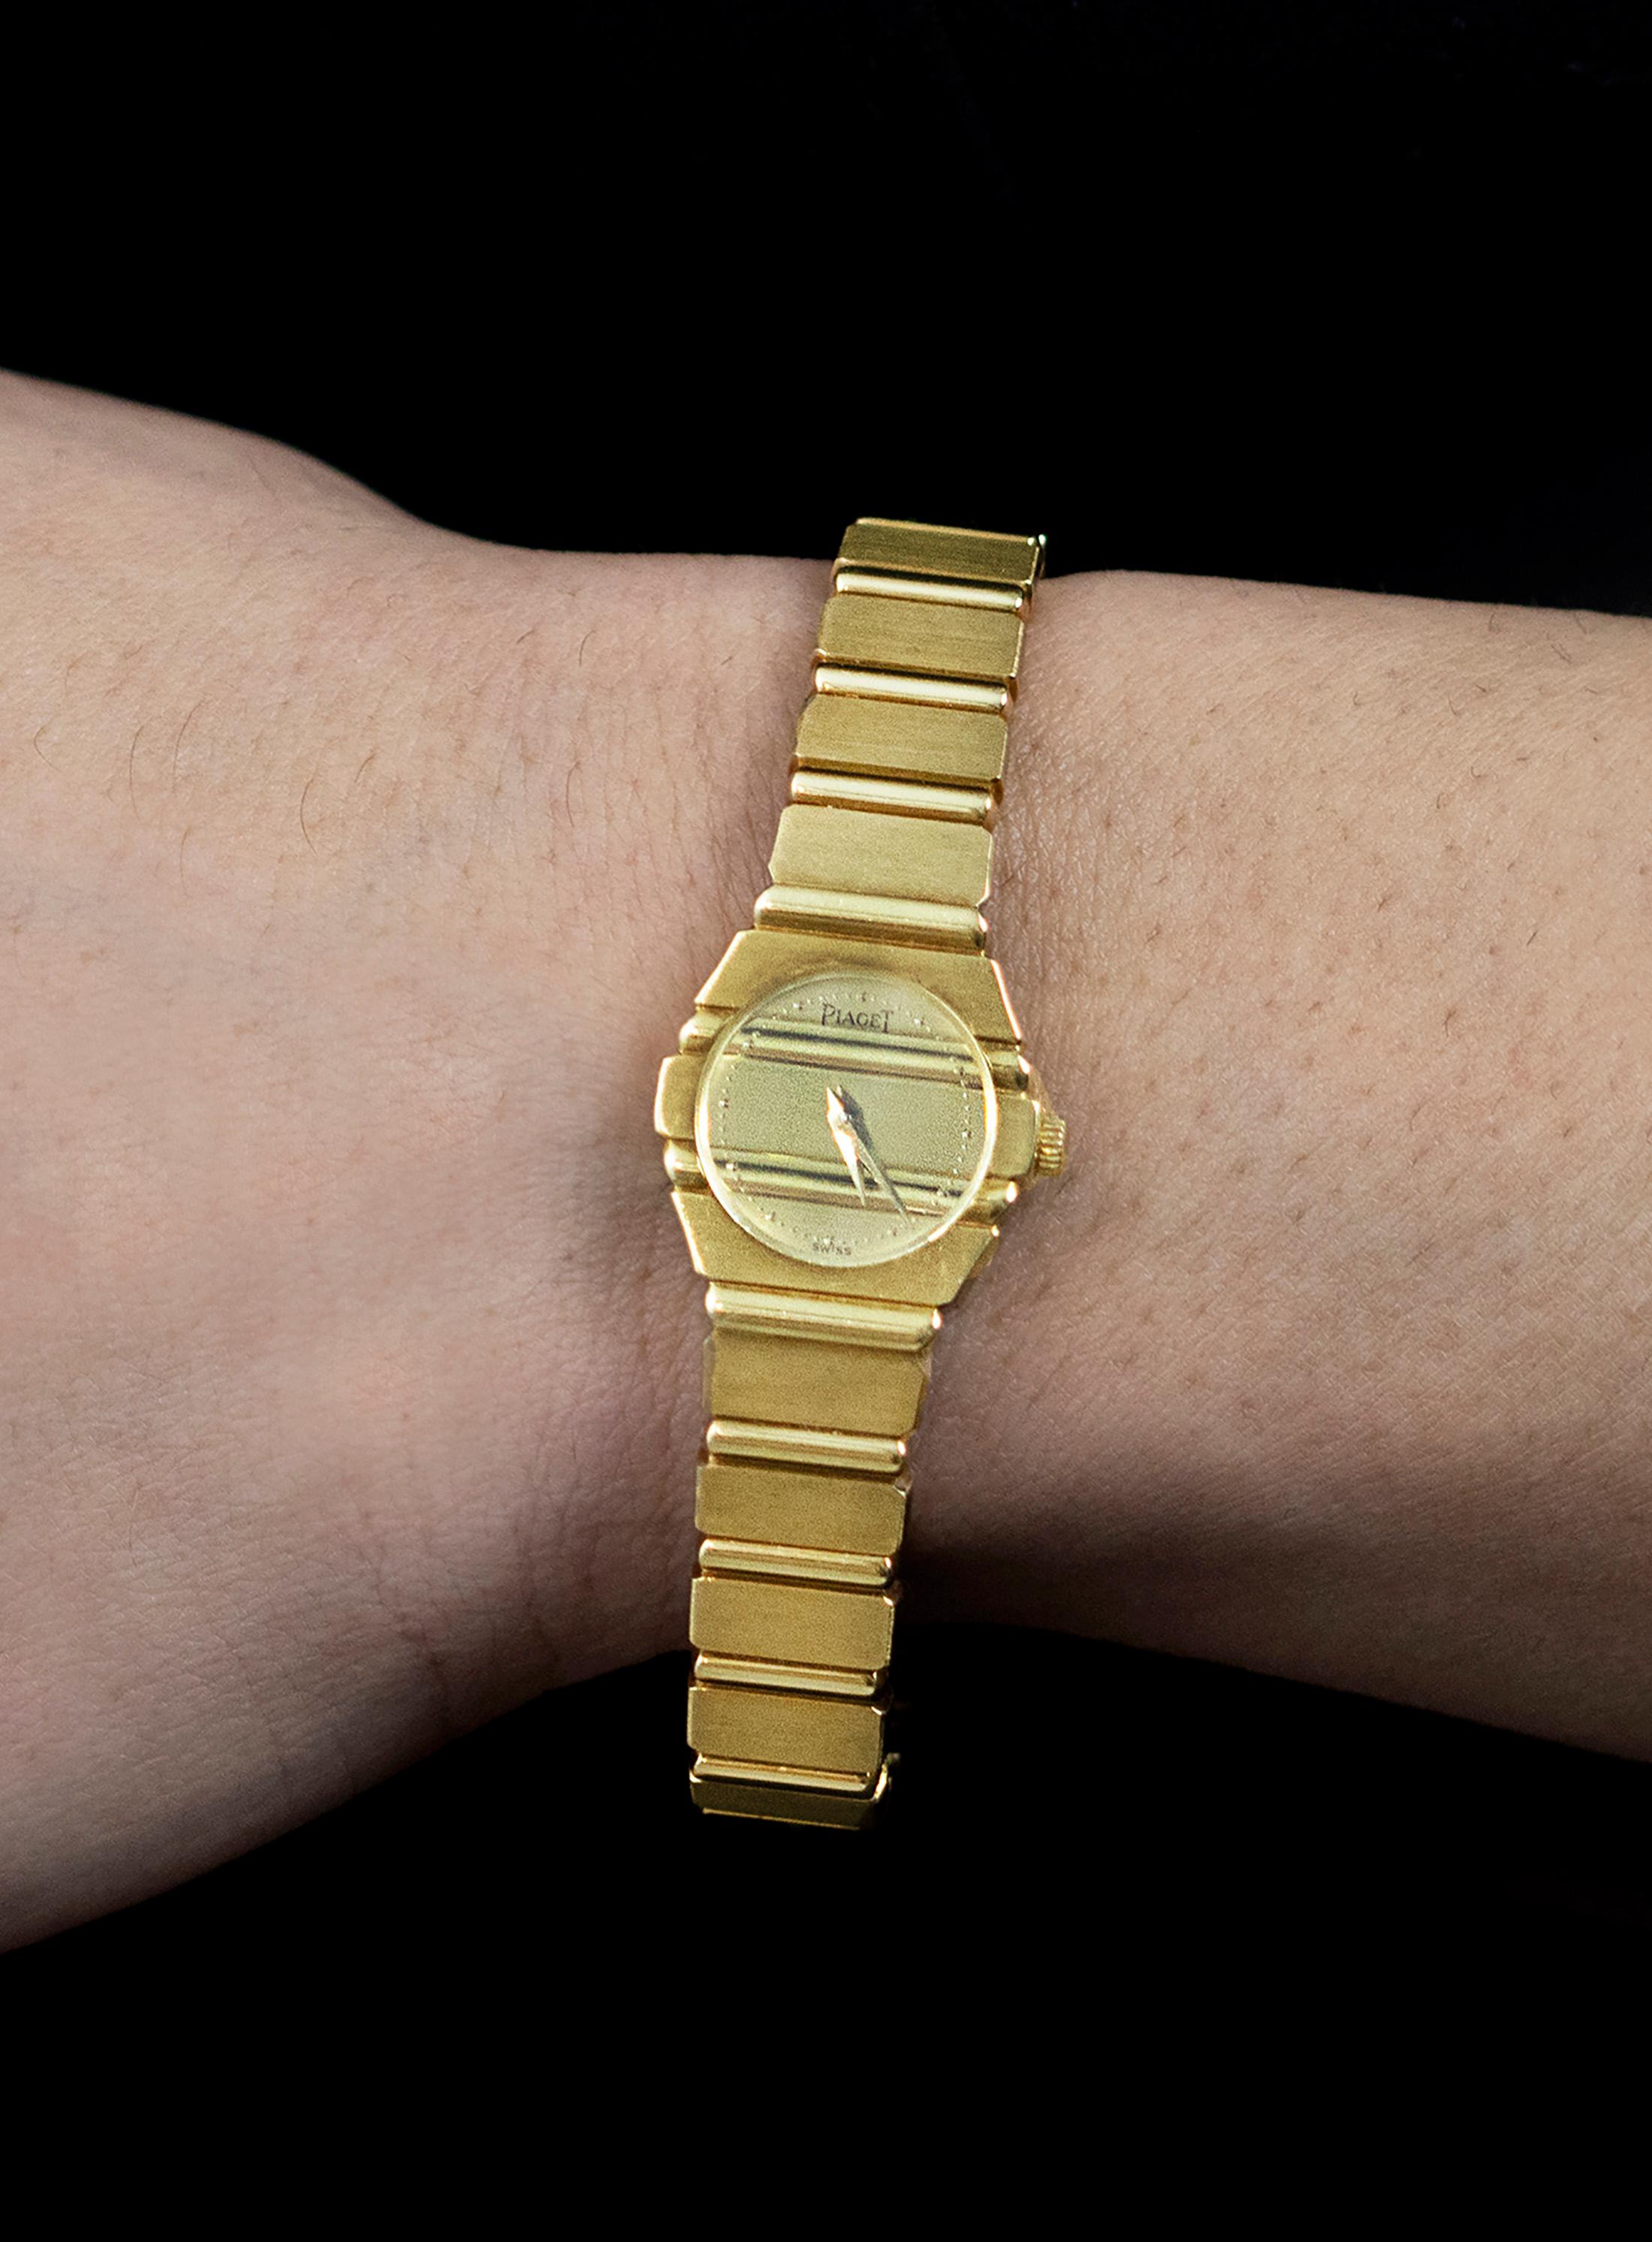 Piaget Polo 841 C701 18K Yellow Gold Ladies Watch For Sale 1